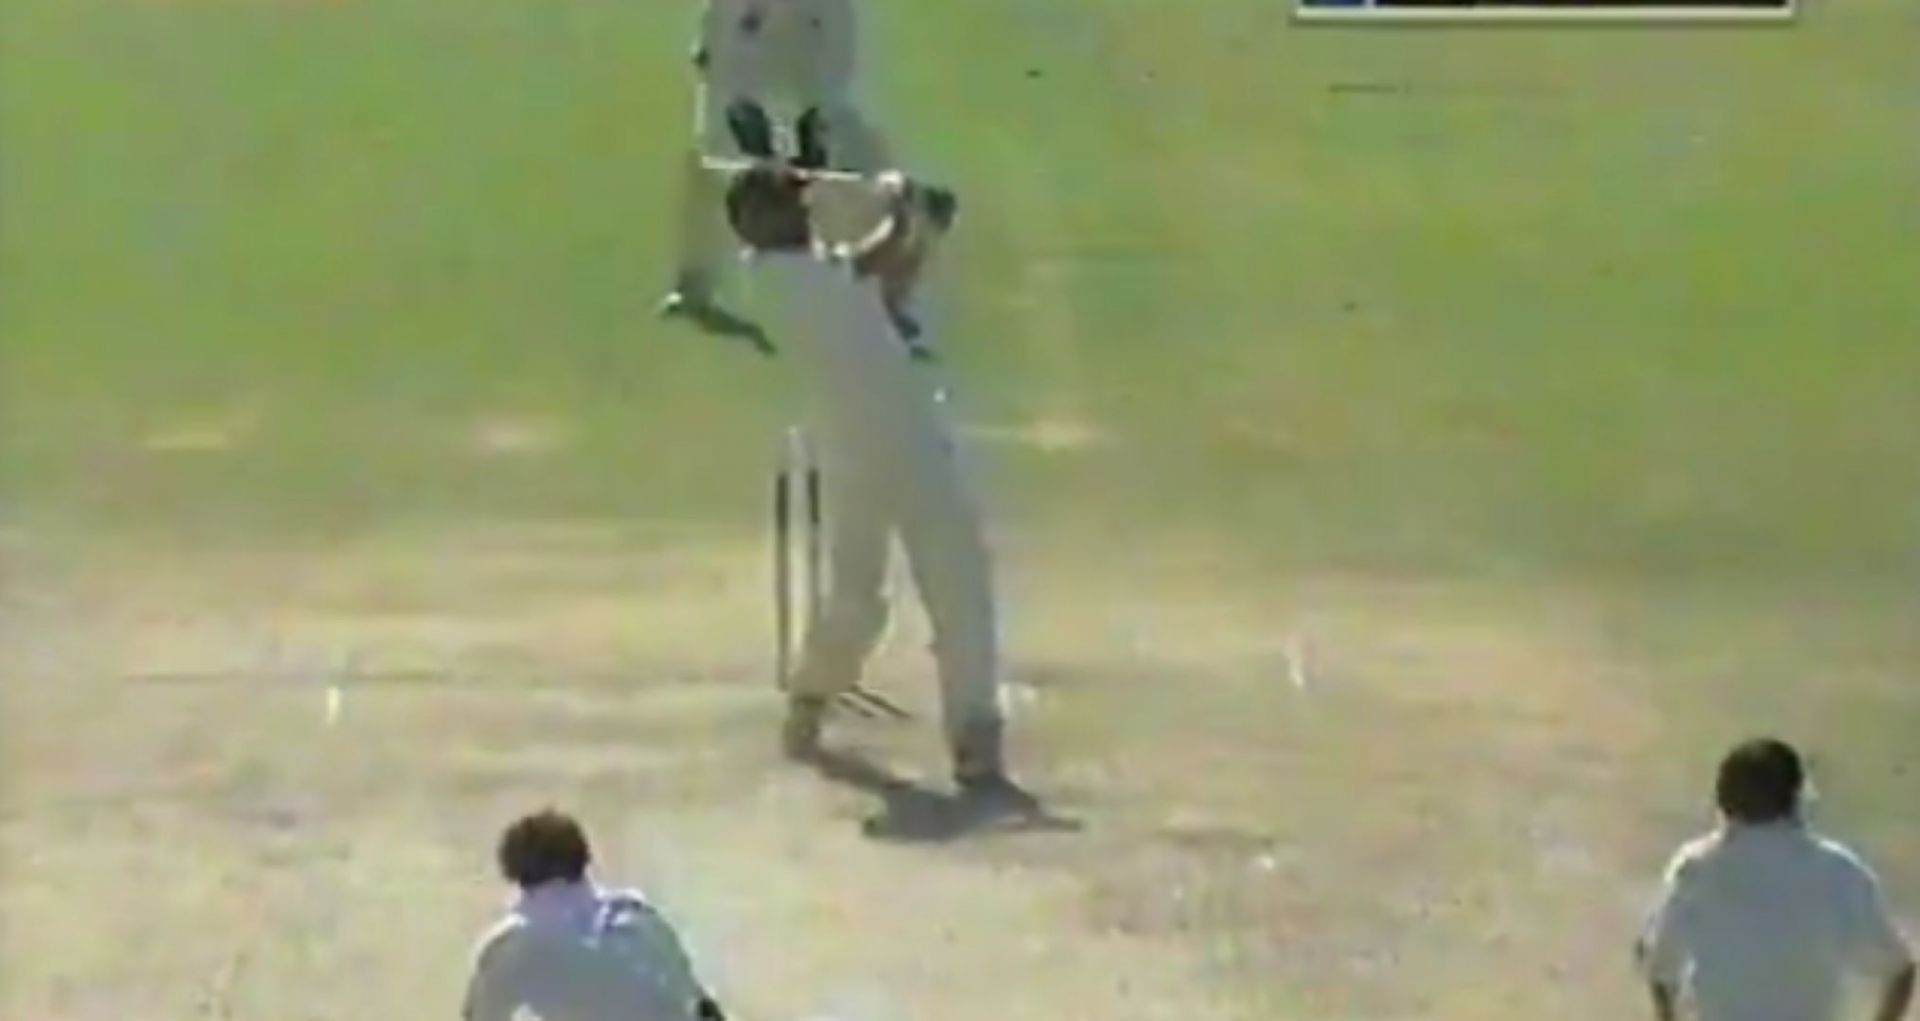 Zaheer Khan tore into Henry Olonga to finish the Indian innings